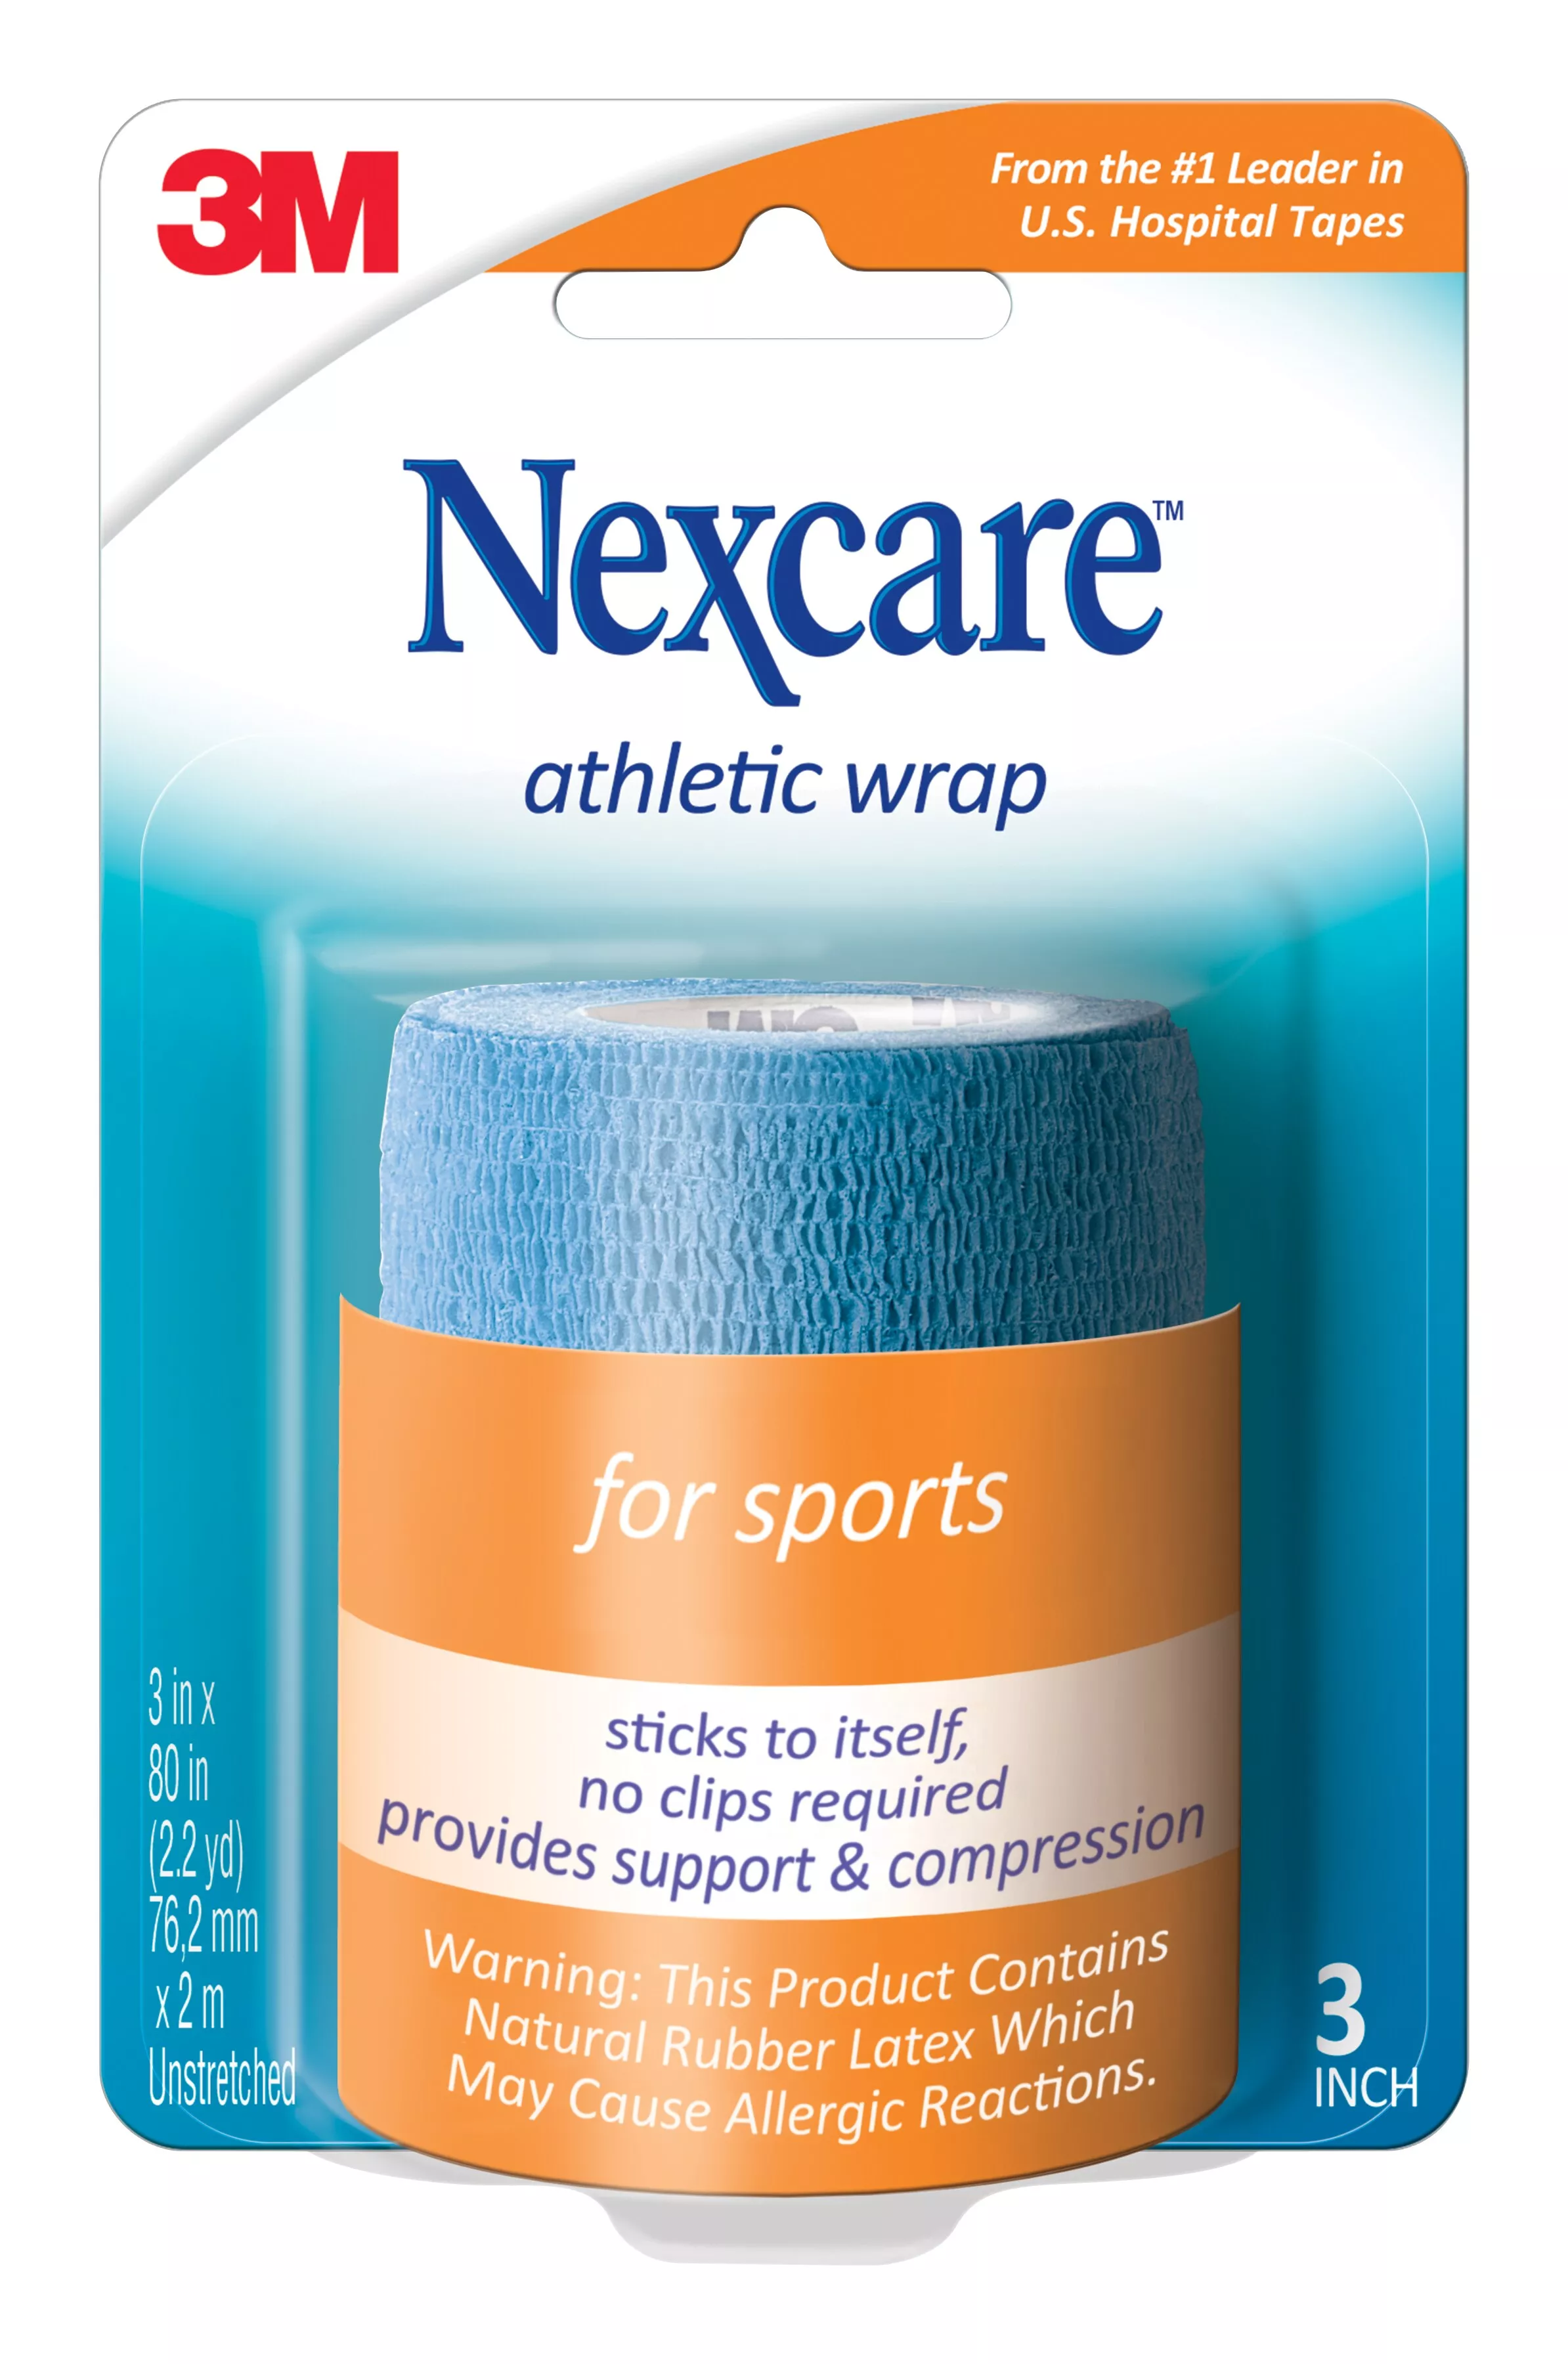 Nexcare™ No Hurt Wrap NHB-3, 3 in x 2.2 yd (76.2 mm x 2 m) unstretched, Blue